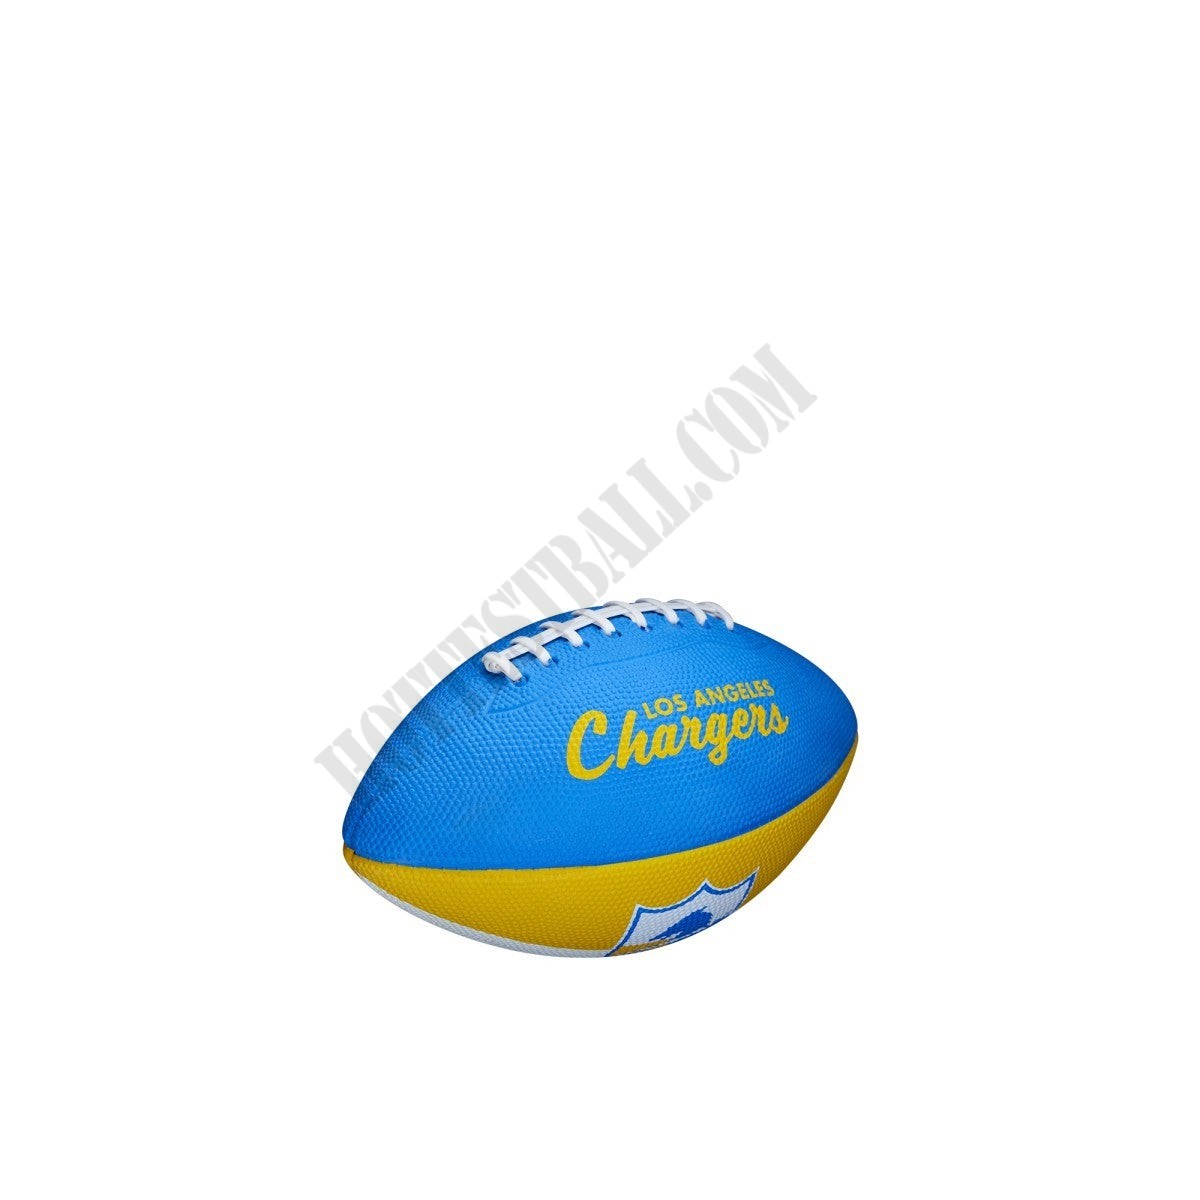 NFL Retro Mini Football - Los Angeles Chargers - Wilson Discount Store - -3